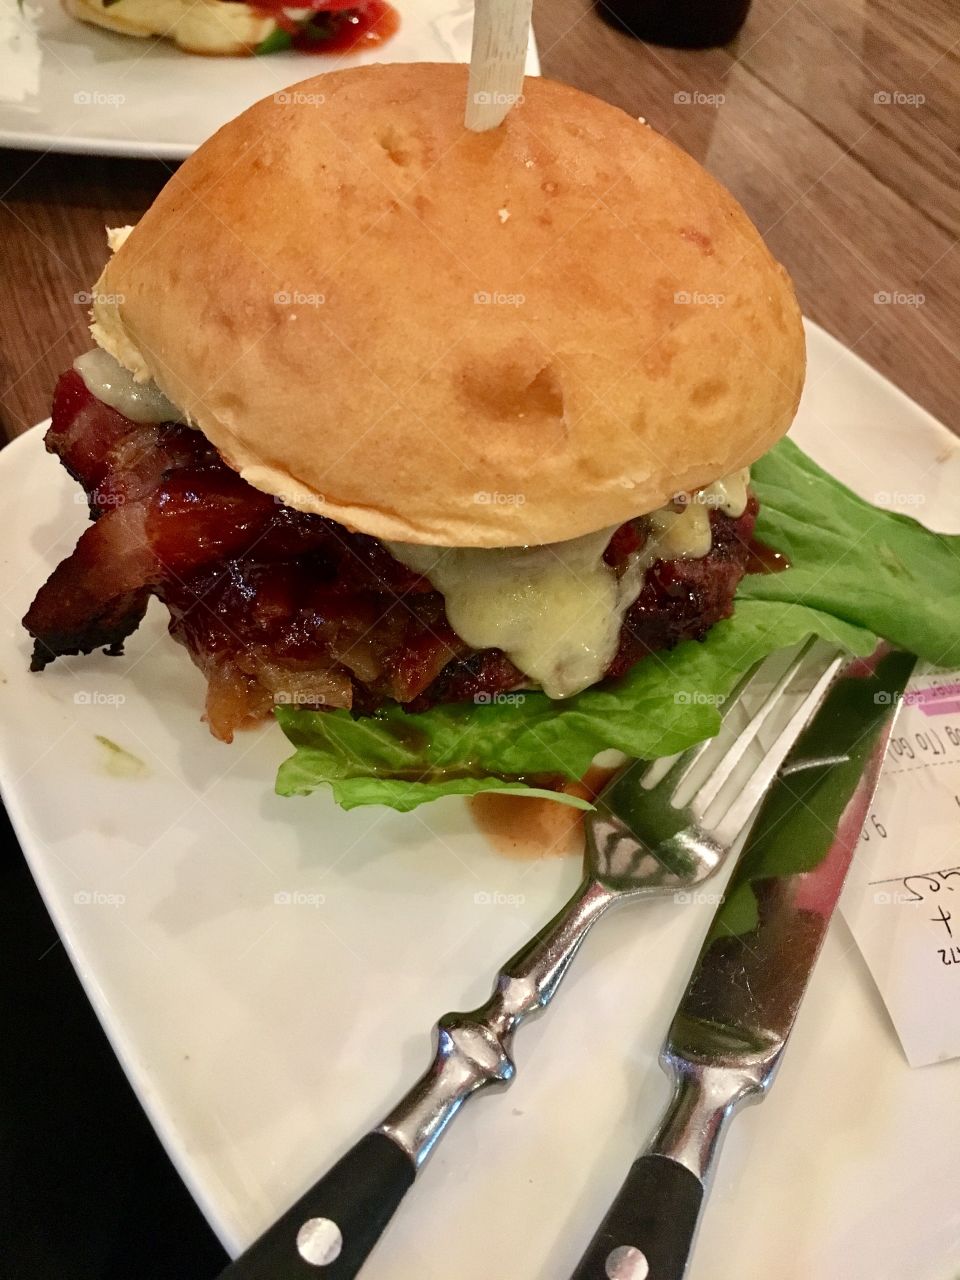 Bacon and vegs in a burger ❤️